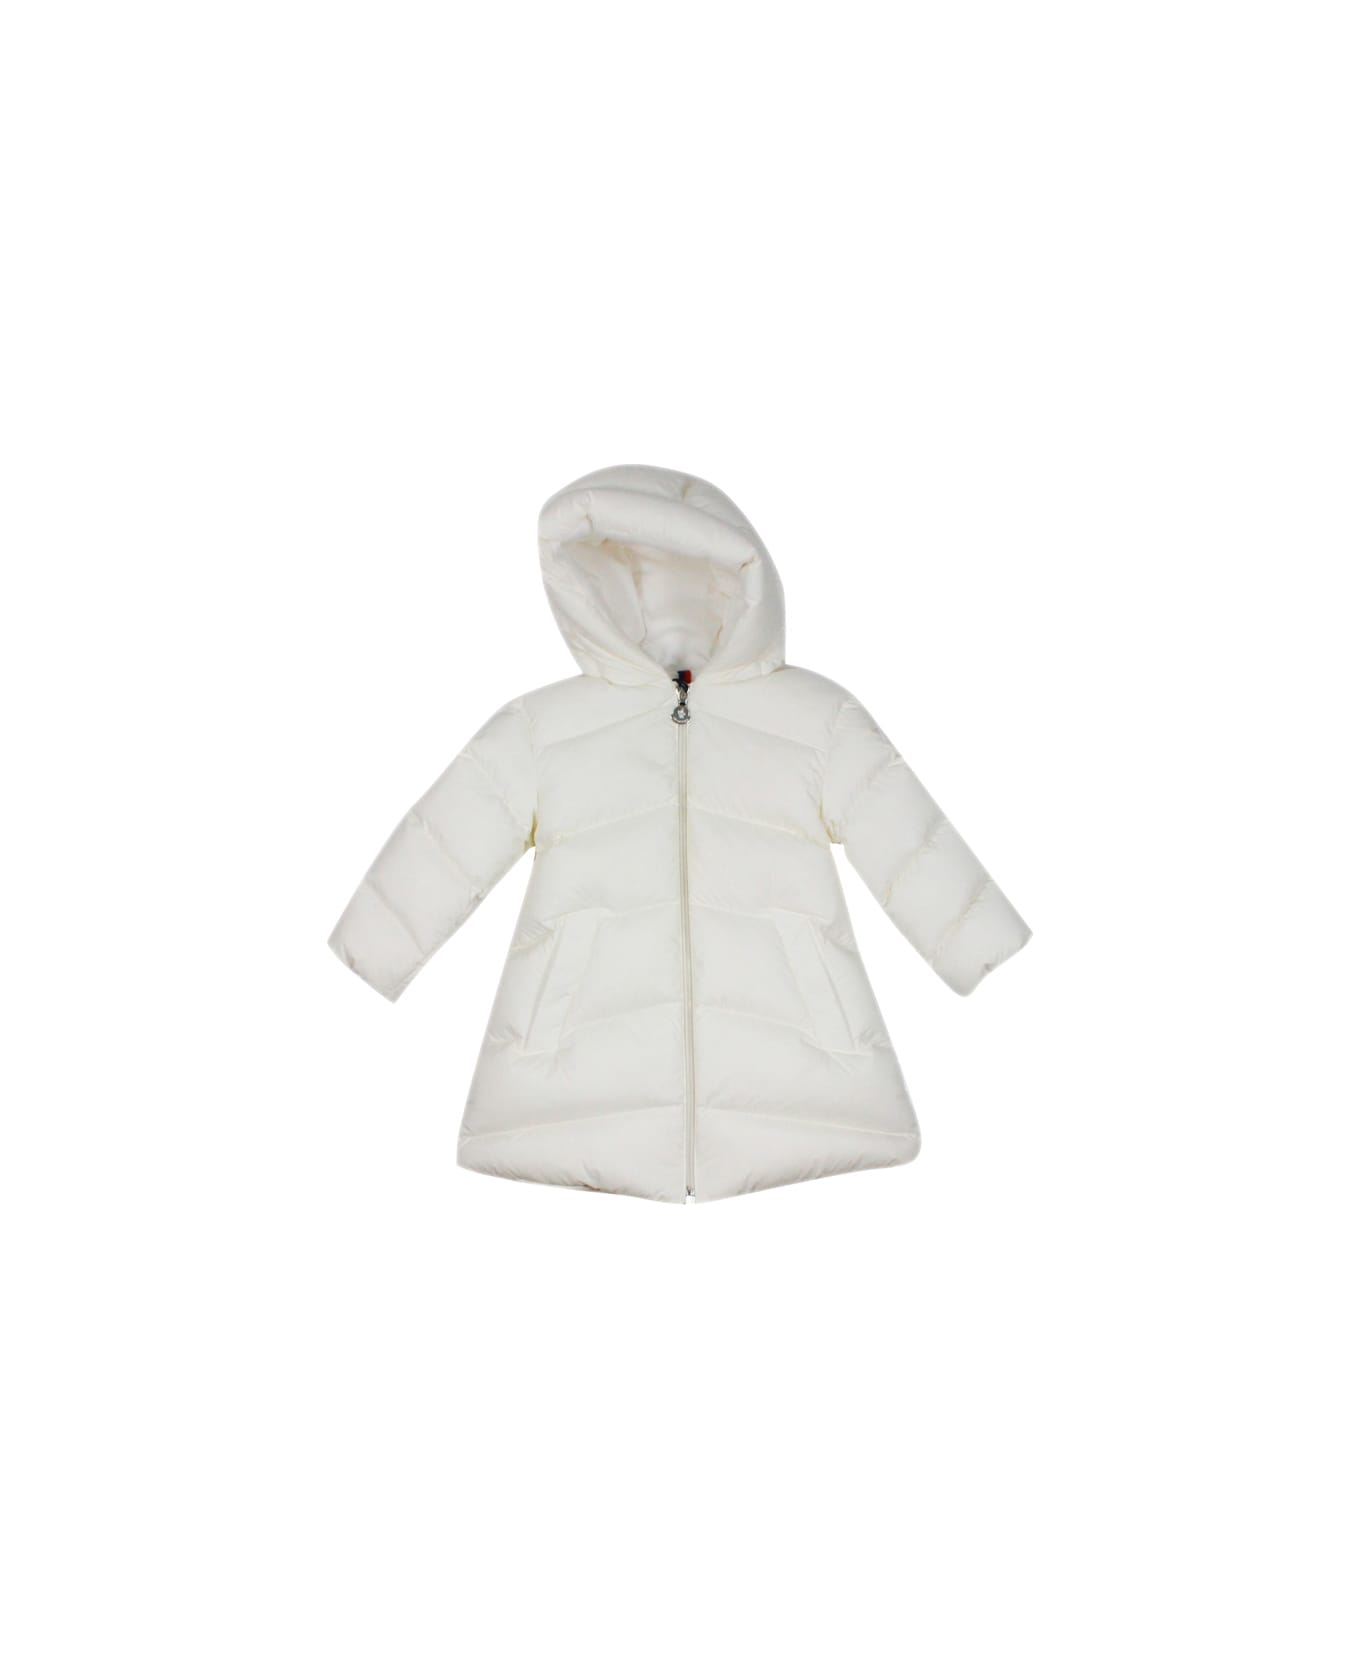 Moncler Long Down Jacket Pesha In Real Goose Down With Hood And Elastic Waistband - White